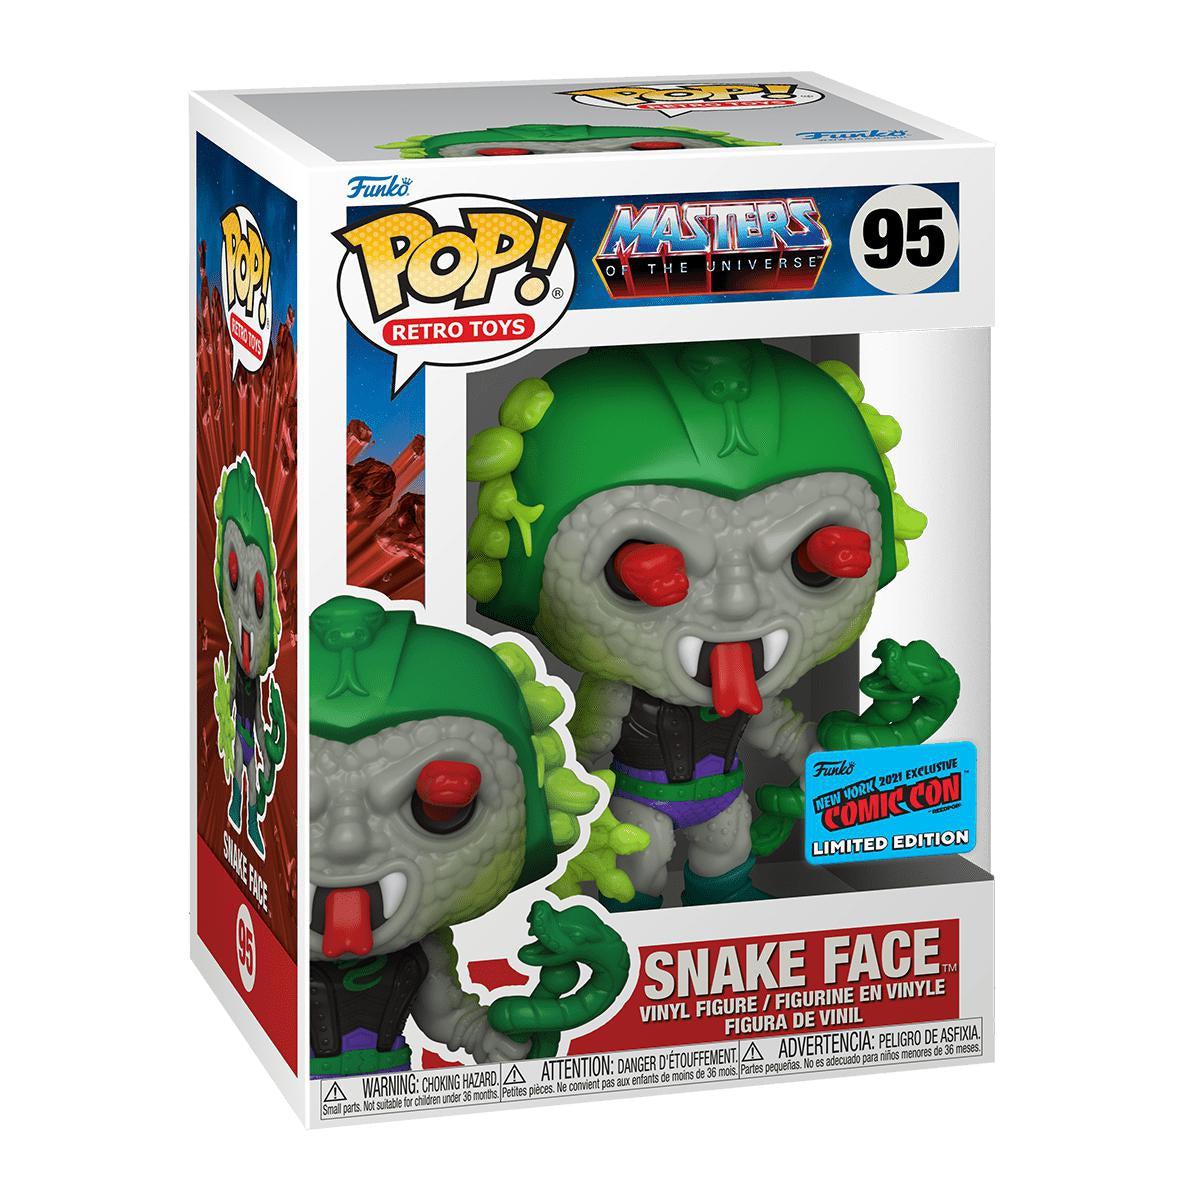 Funko POP Masters Of the universe Snake Face NYCC Sticker